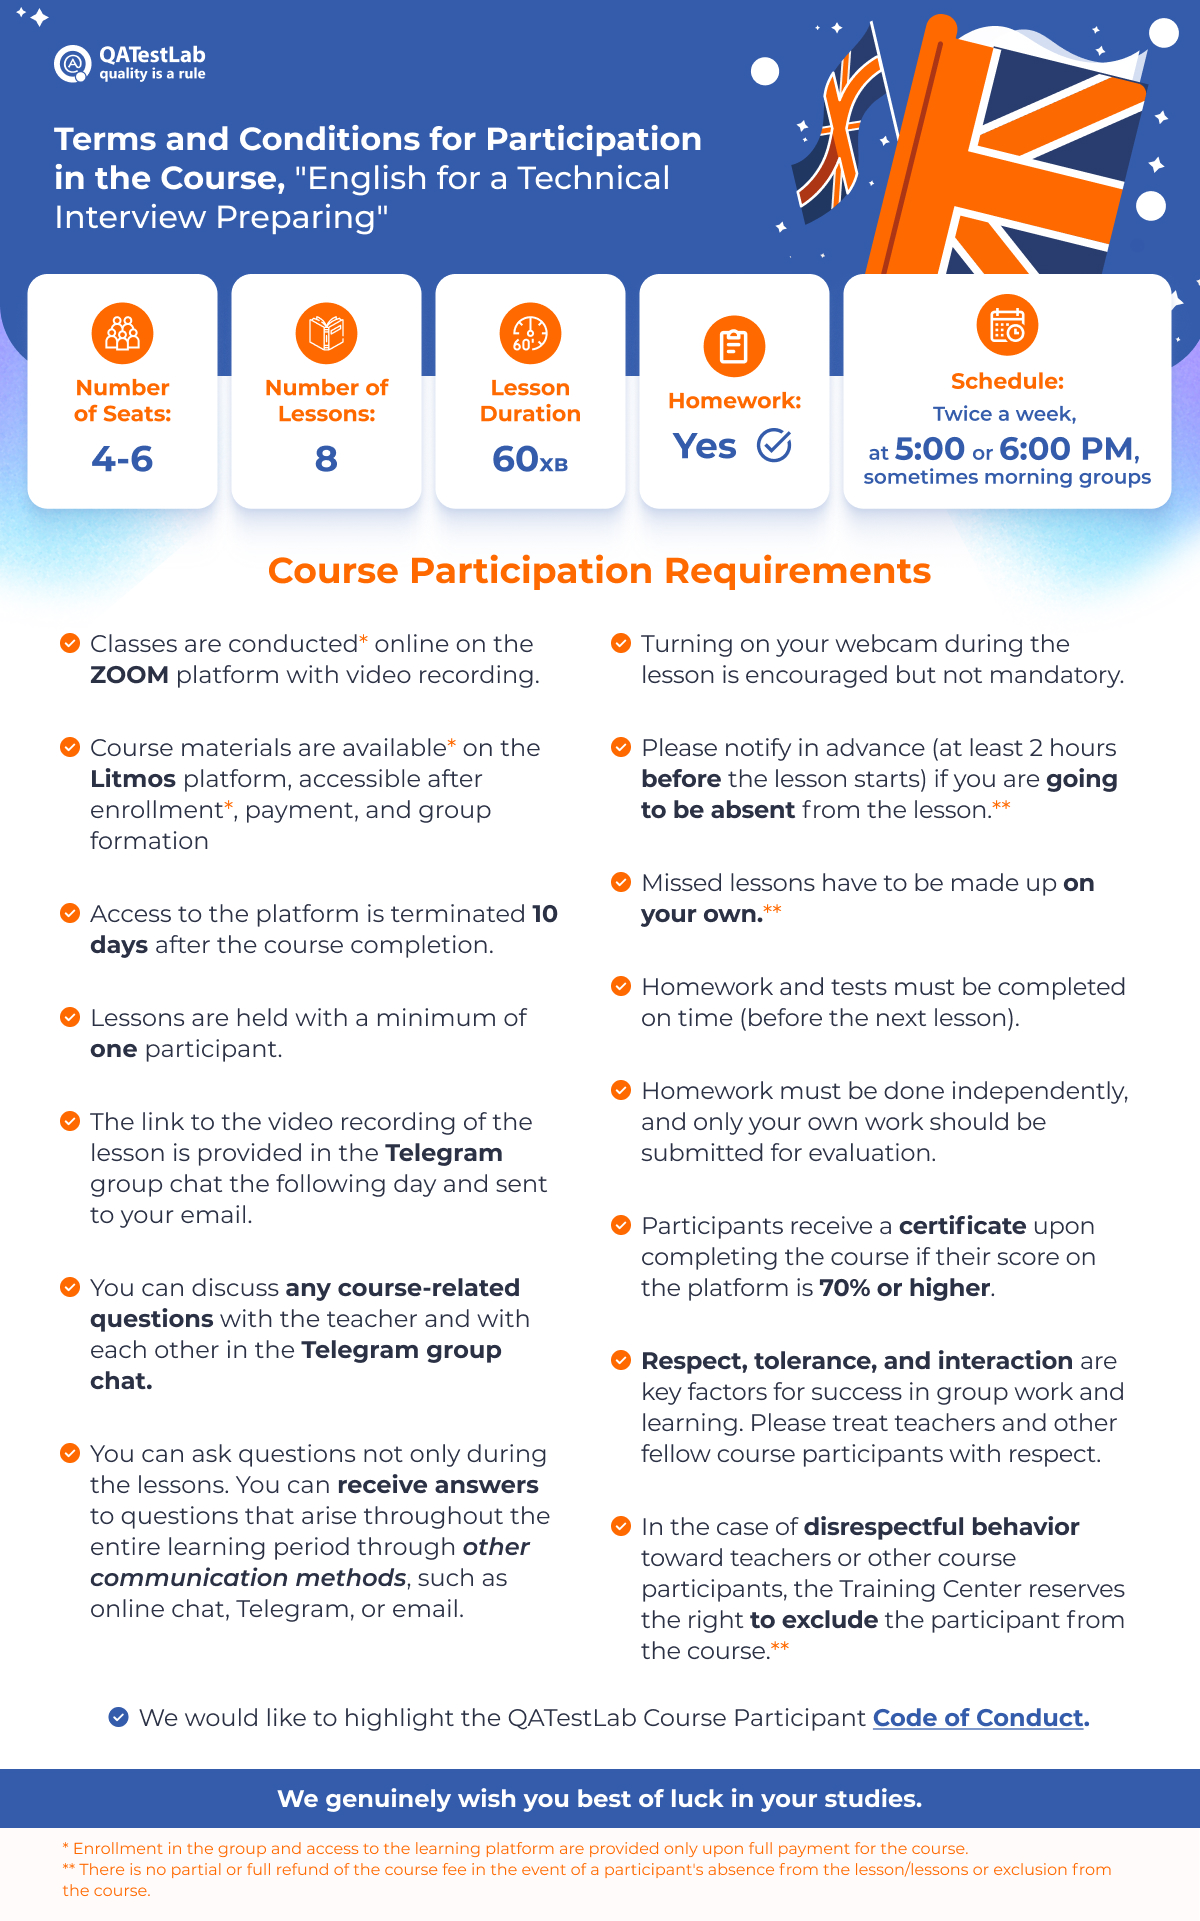 Rules for participation in the course